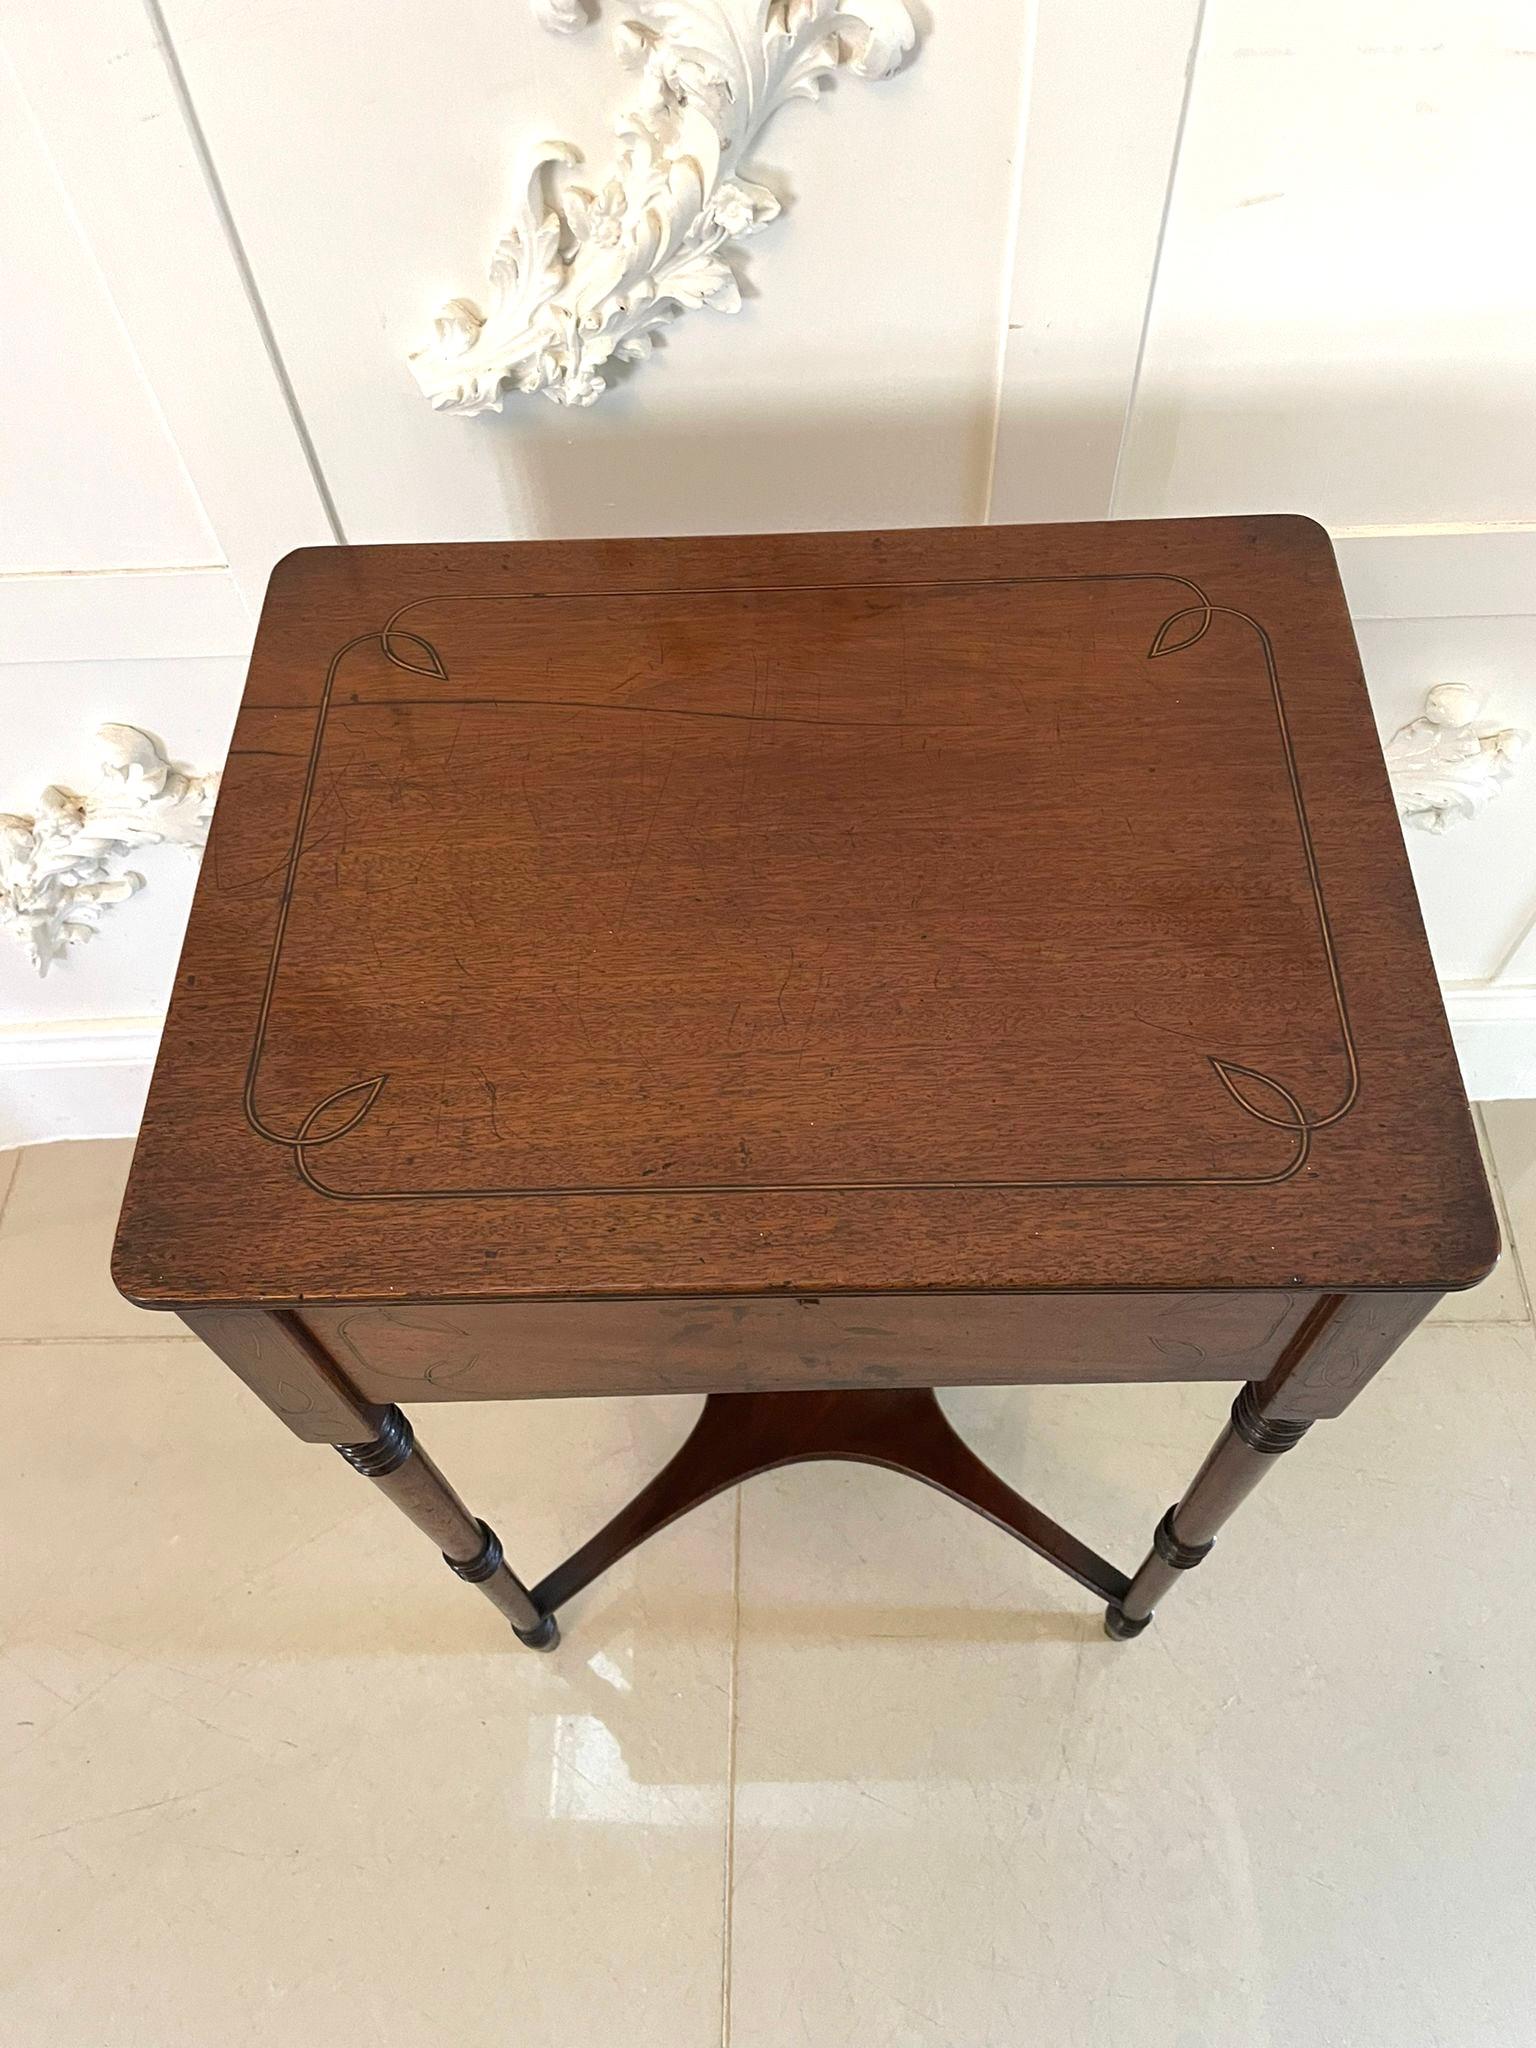 Other Antique Regency Freestanding Quality Mahogany Inlaid Lamp Table  For Sale